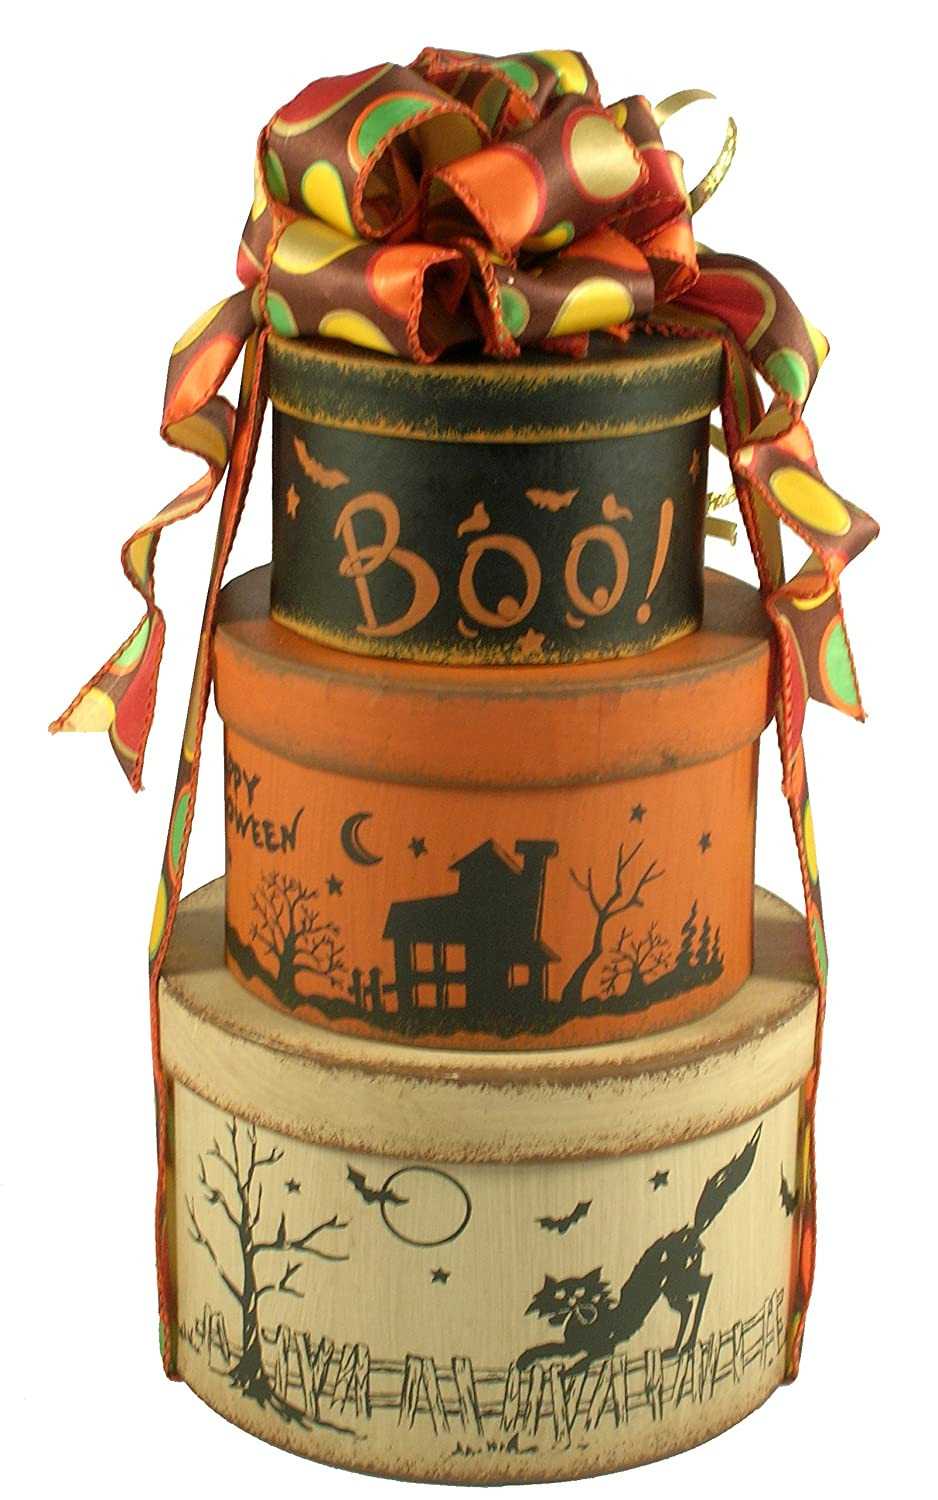 Halloween Gift Baskets Ideas
 Best Halloween Gift Baskets for Adults and Kids